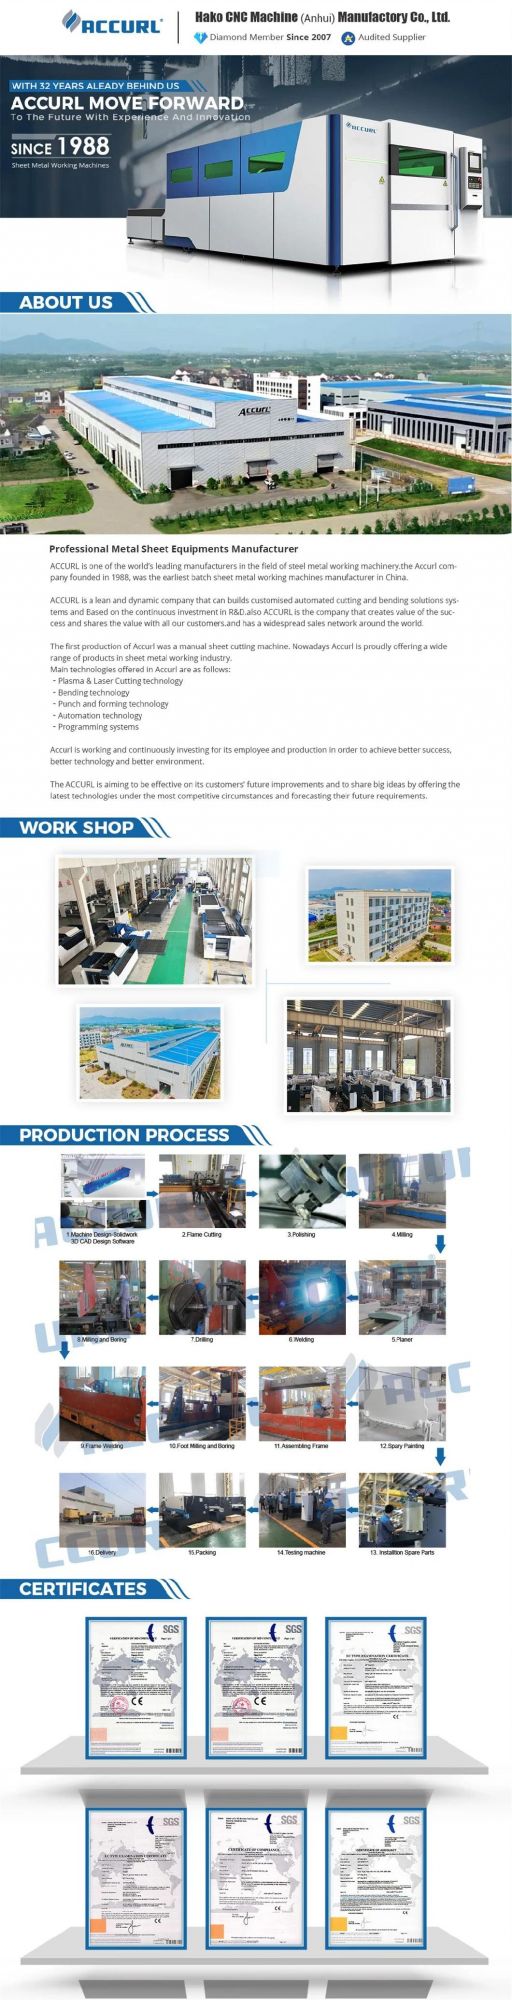 1000 Tons H Frame Hydraulic Press Tools for Compression Moulding of SMC Sheet 1000t H Type Hydraulic Press Machine